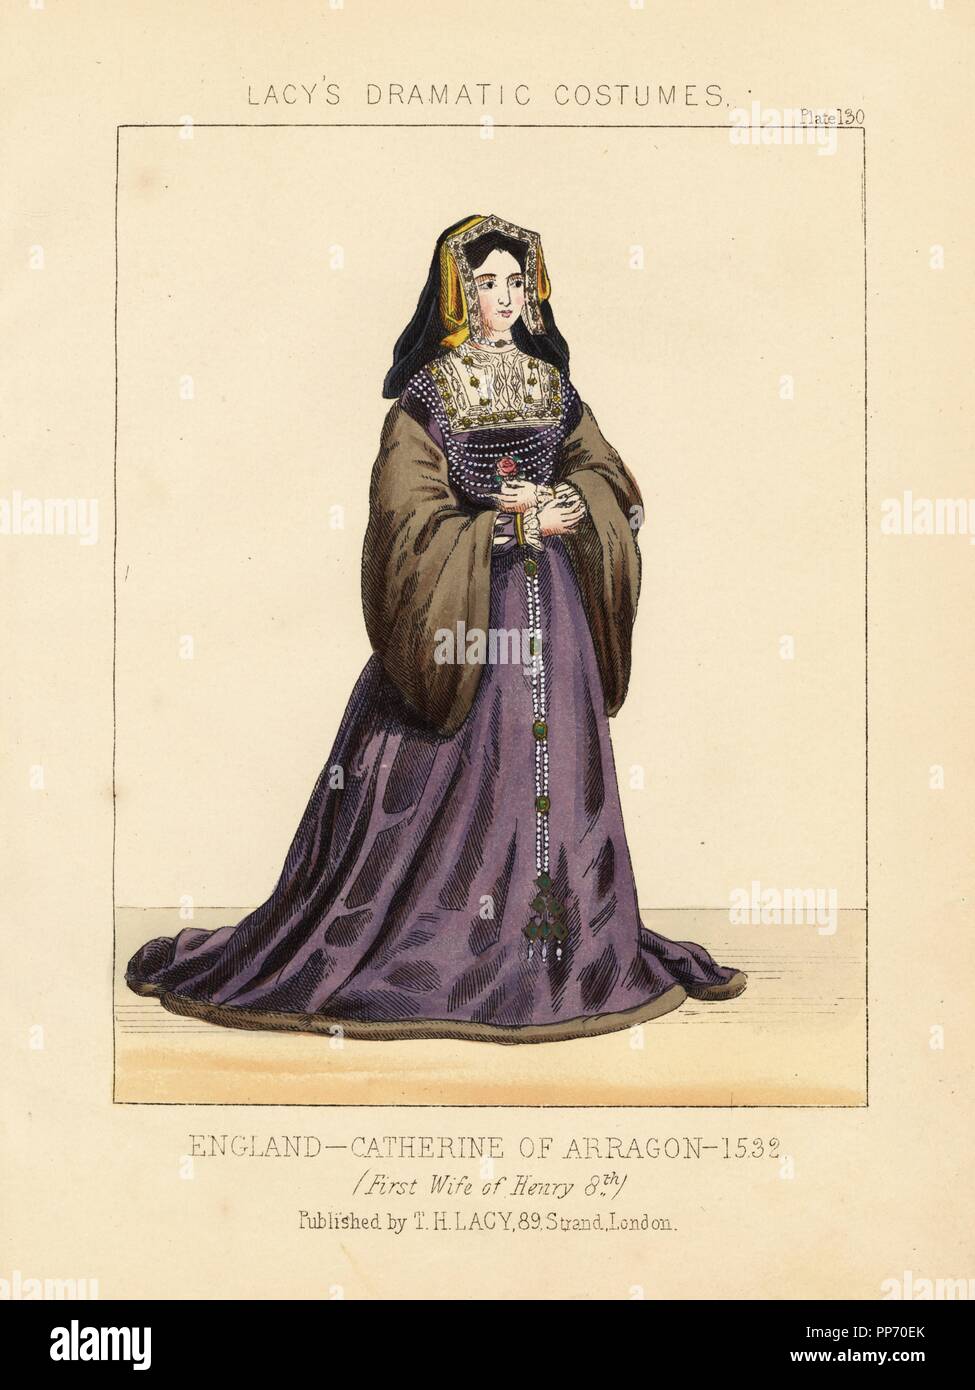 Catherine of Aragon, first wife of Henry VIII, England, 1532. Handcoloured lithograph from Thomas Hailes Lacy's 'Female Costumes Historical, National and Dramatic in 200 Plates,' London, 1865. Lacy (1809-1873) was a British actor, playwright, theatrical manager and publisher. Stock Photo